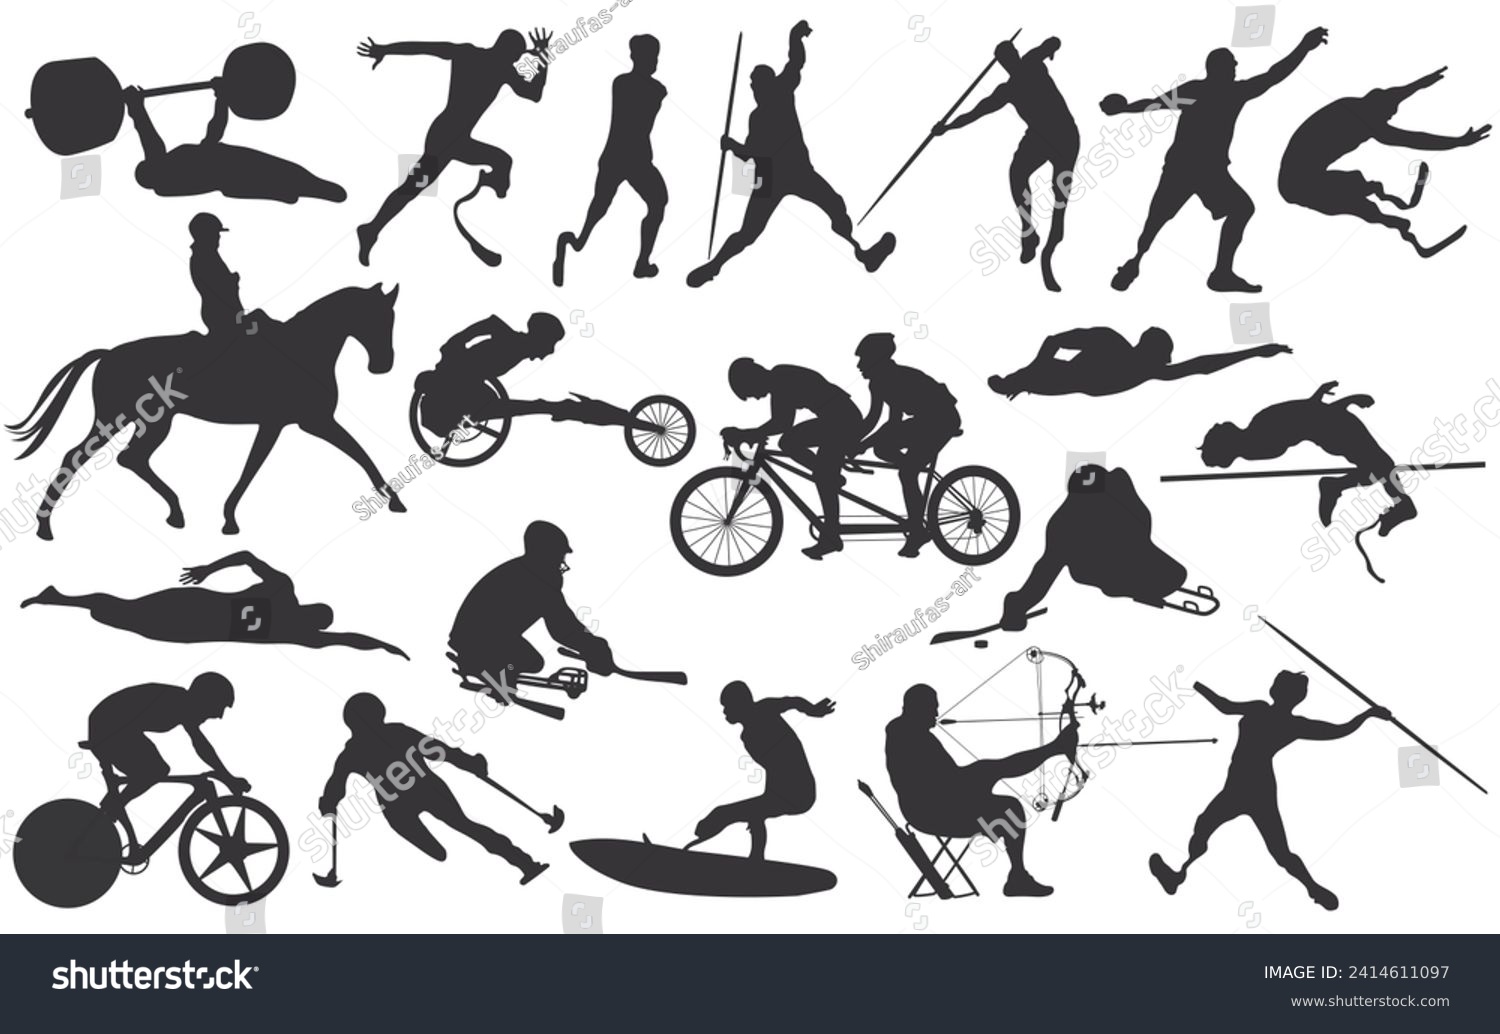 SVG of Set of 20 male athletes with disability vol.2. Cutout solid icons. Men sport player silhouettes vector illustration. svg